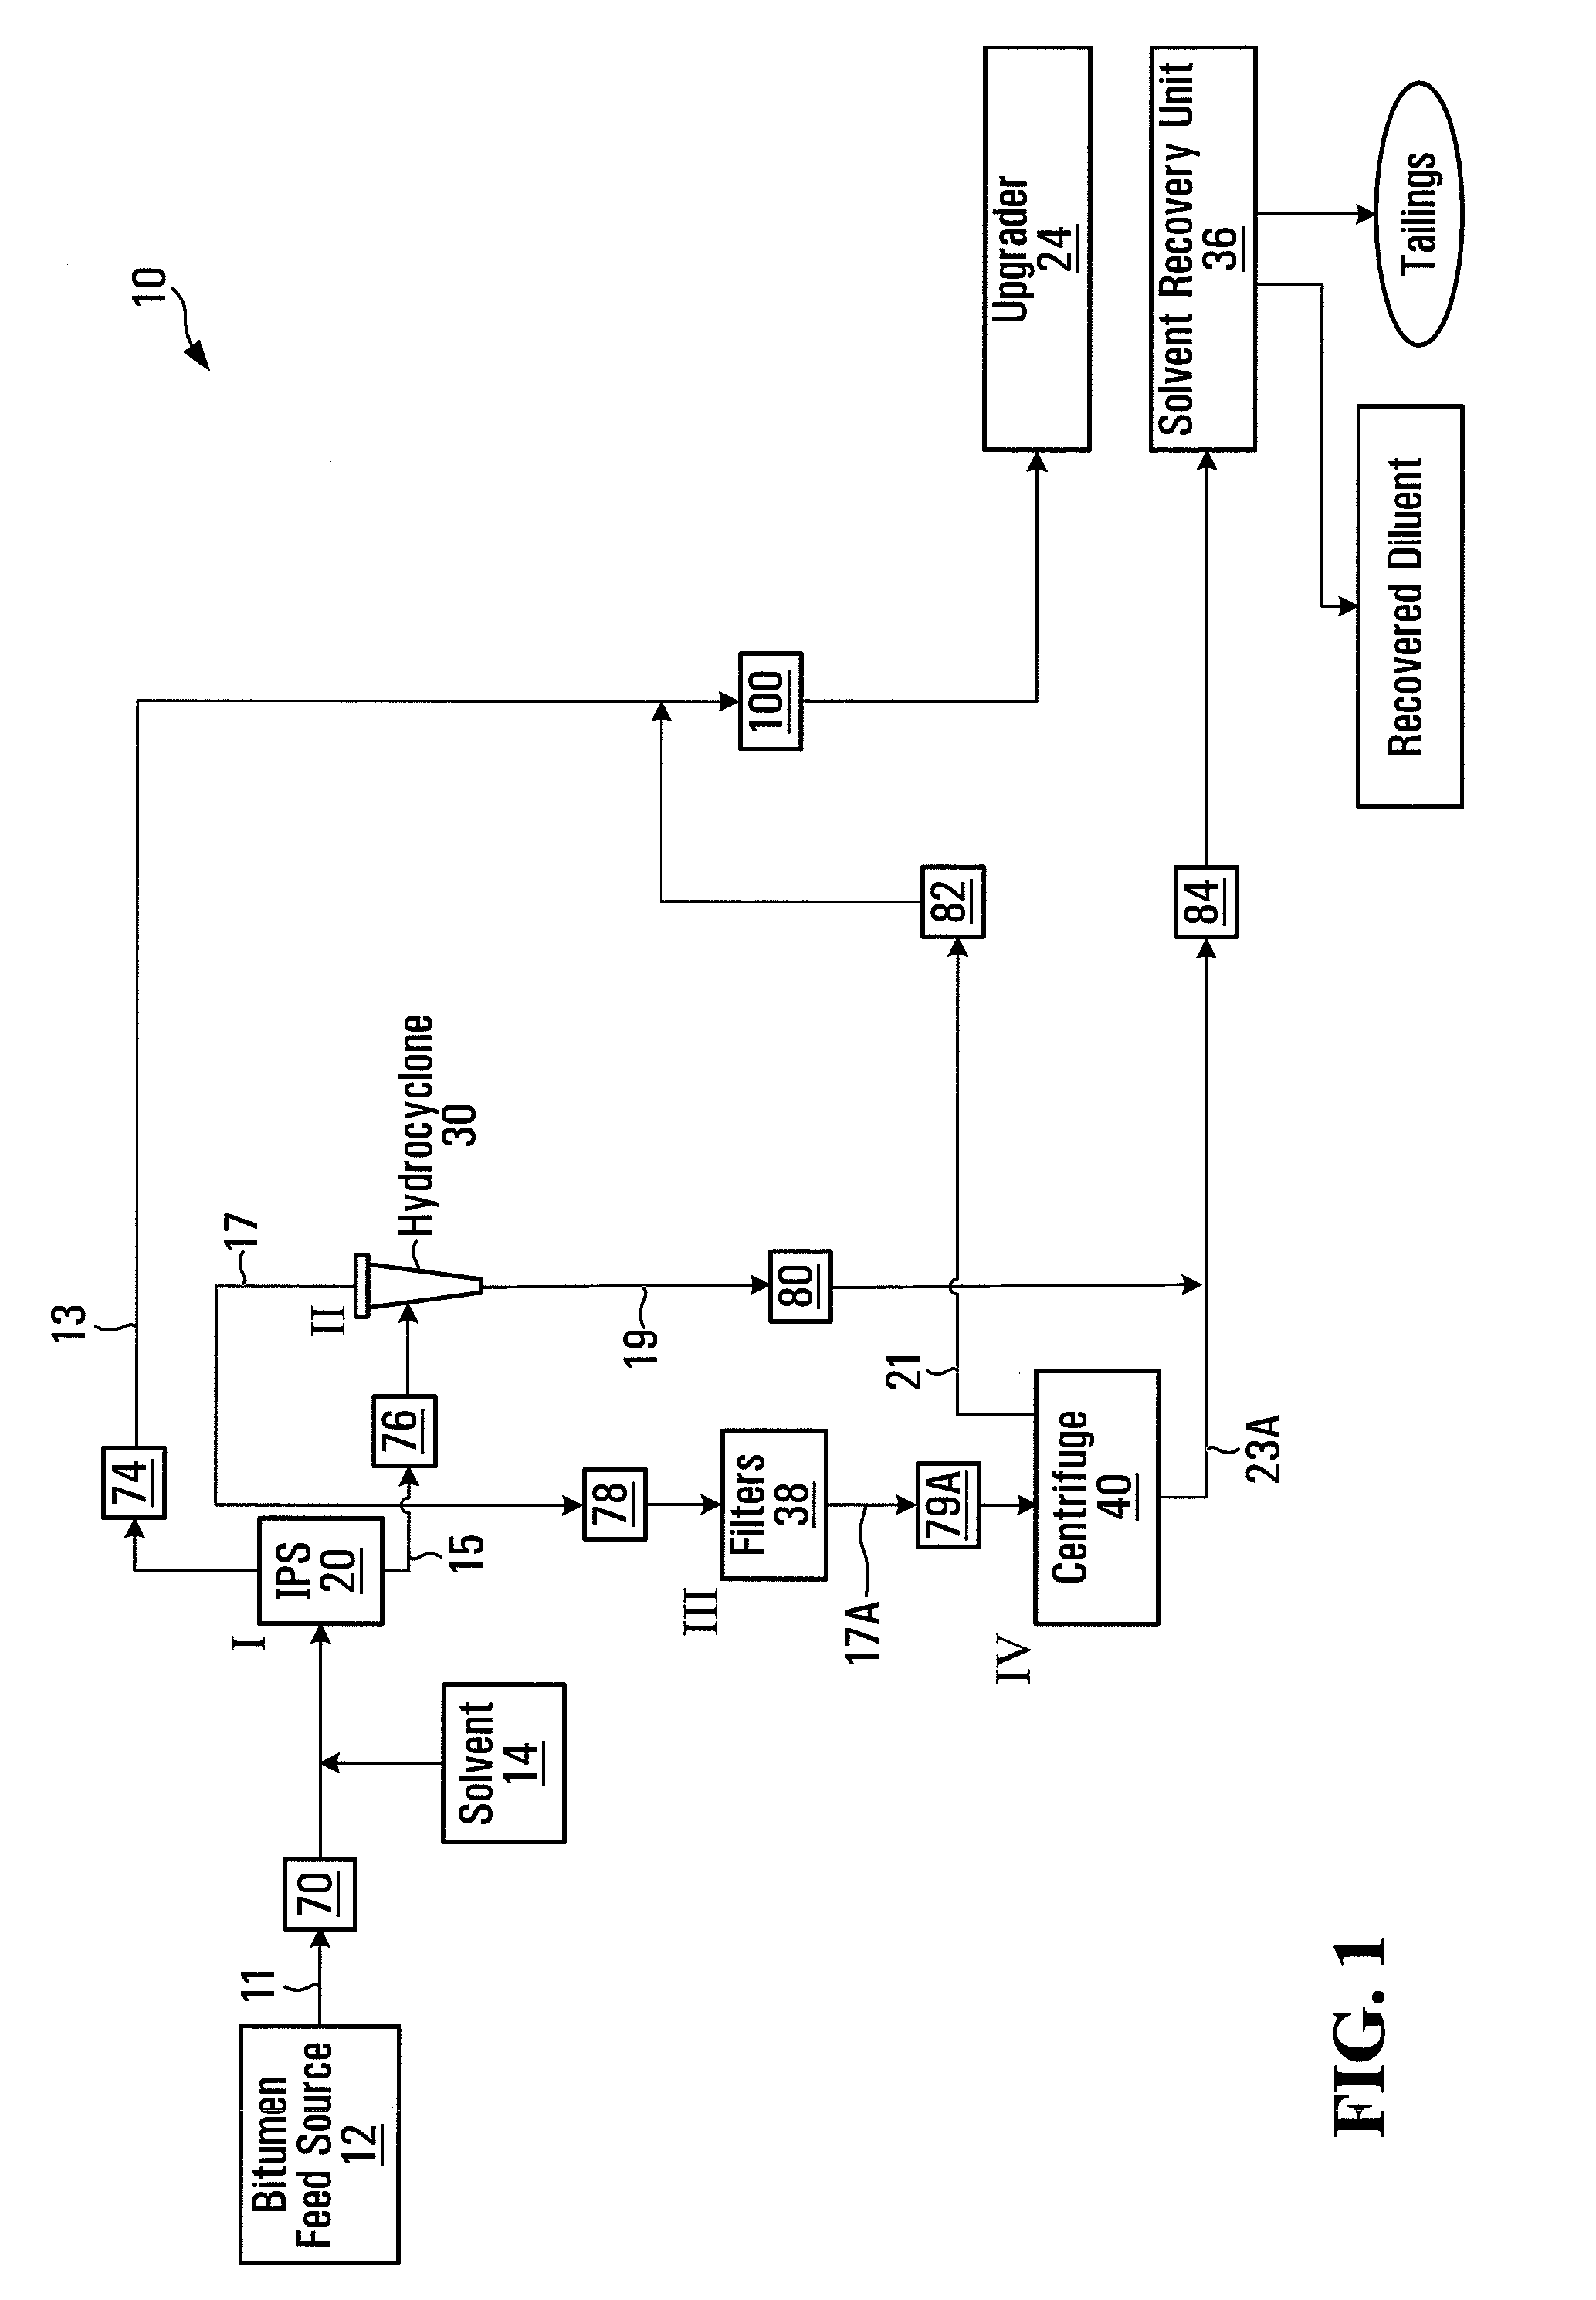 System and process for concentrating hydrocarbons in a bitumen feed